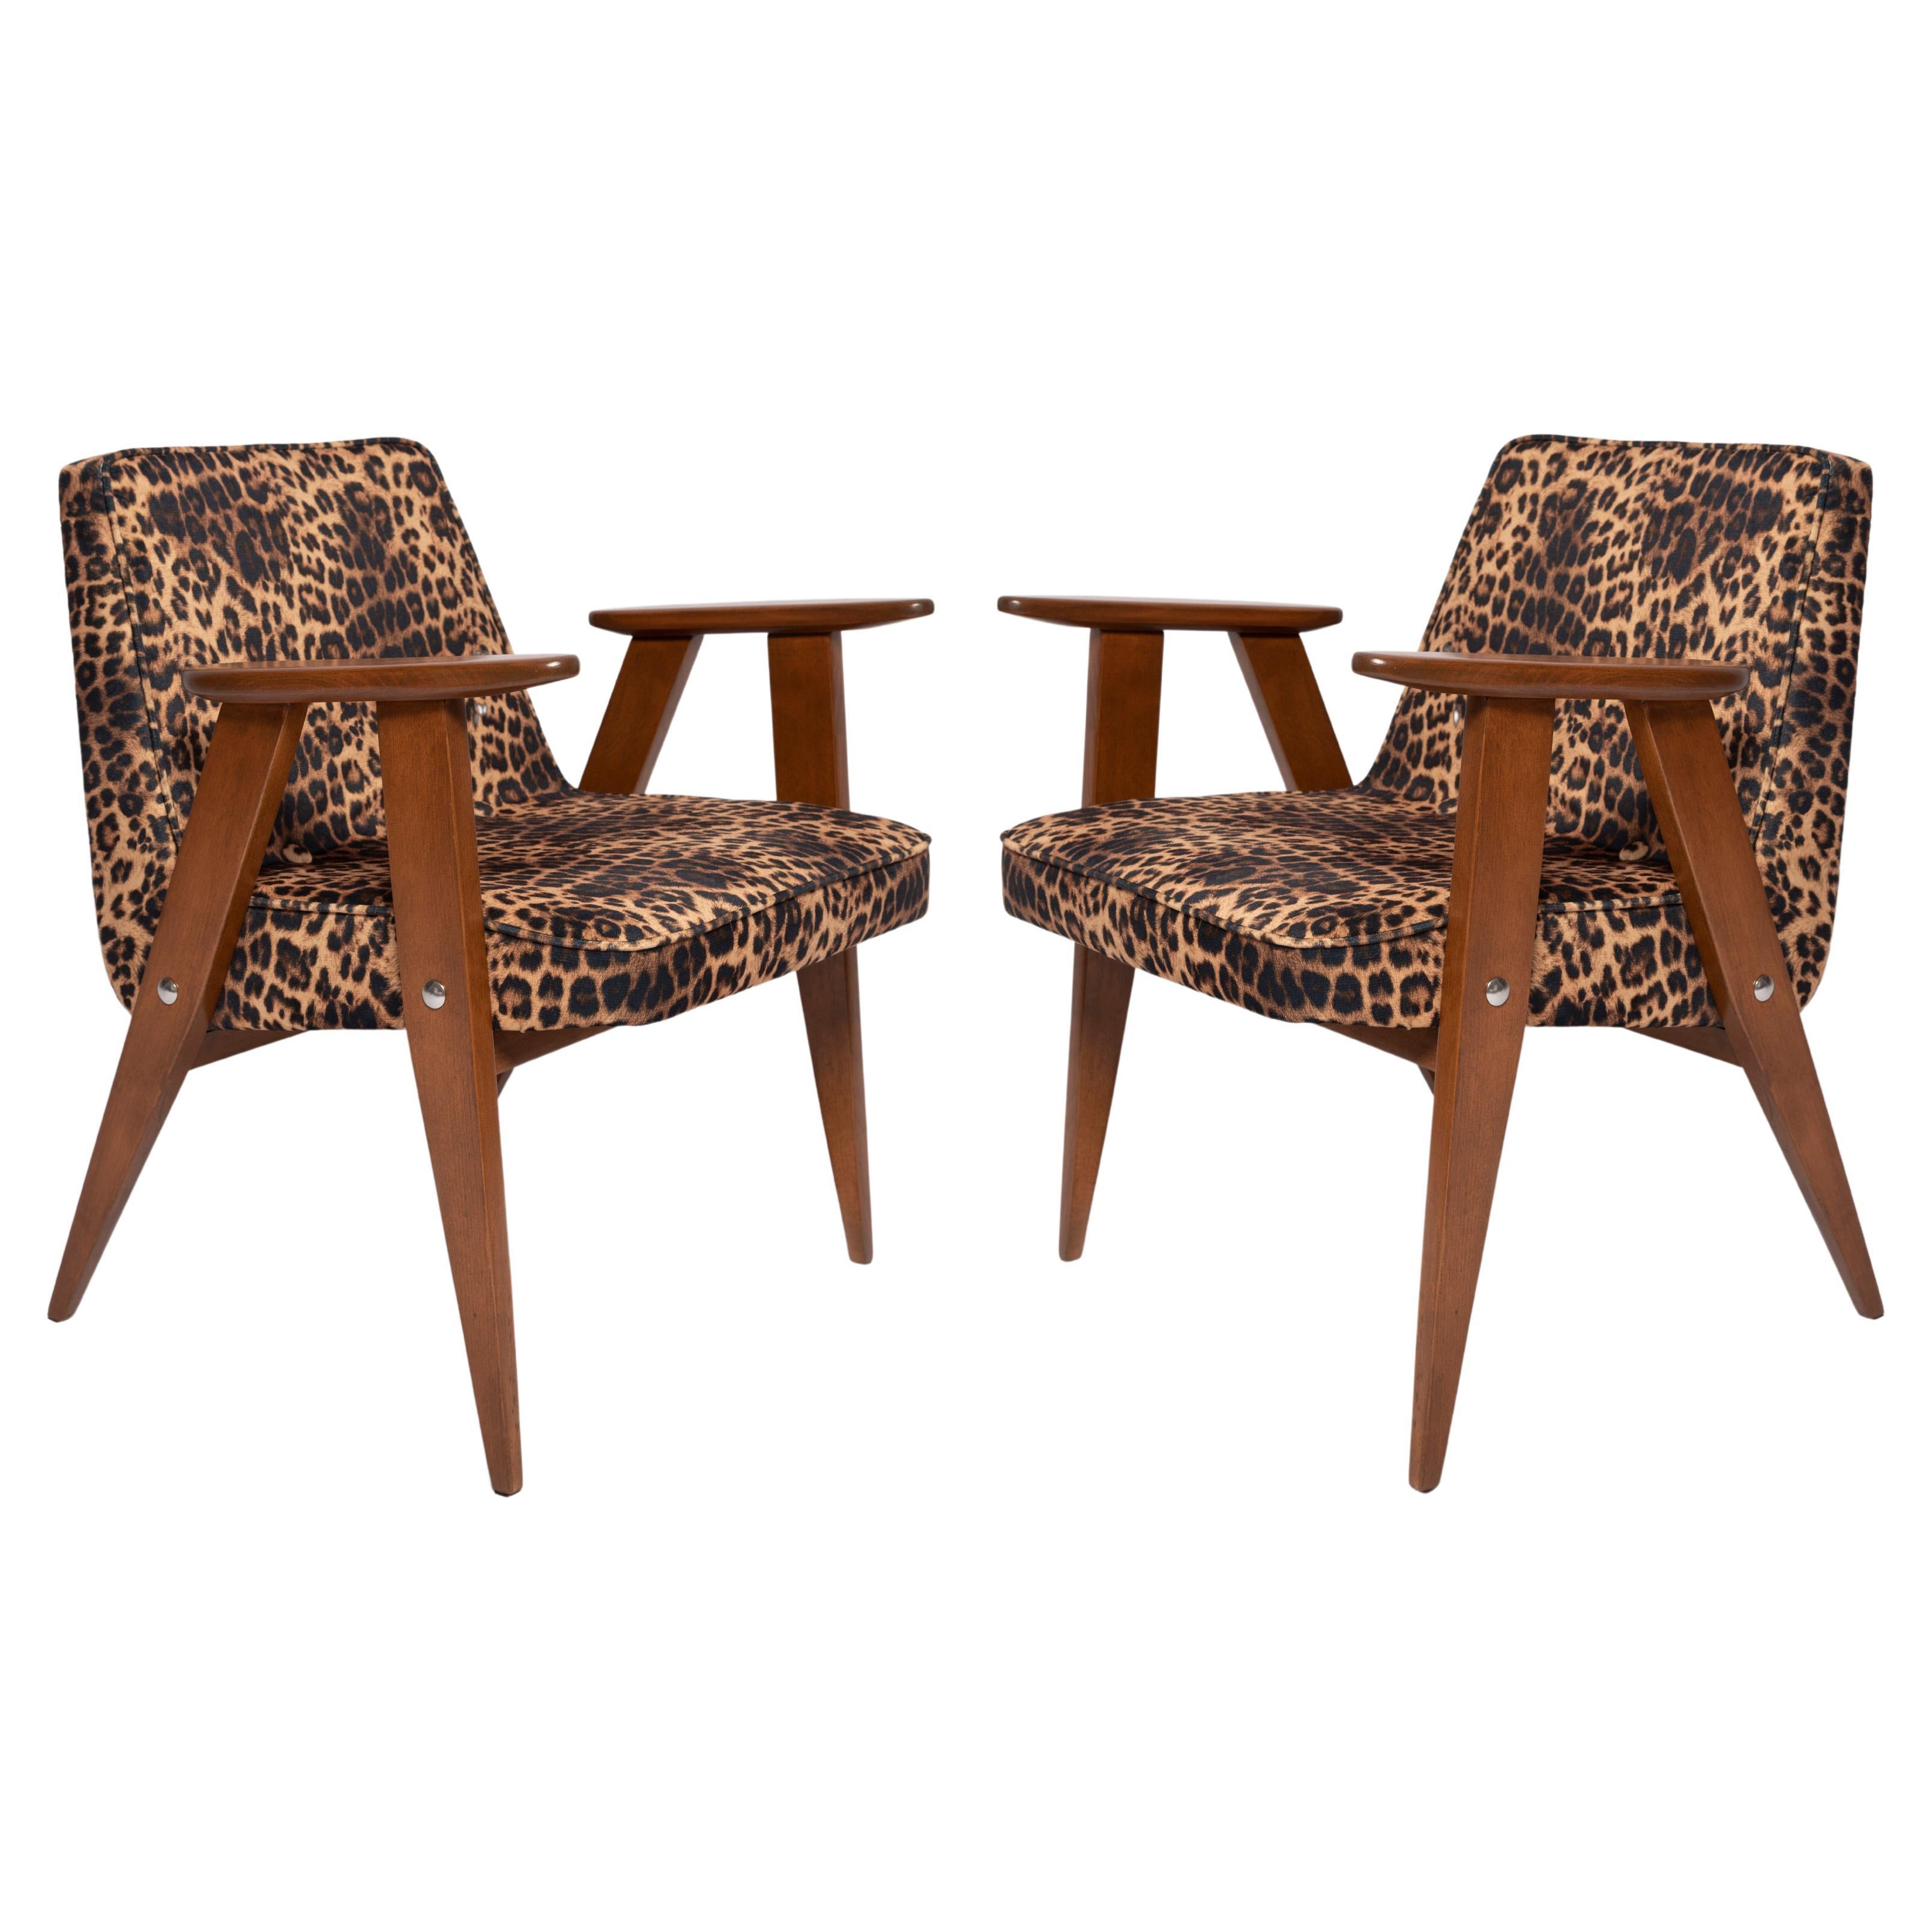 Two Mid Century 366 Armchairs in Leopard Print Velvet, Jozef Chierowski, 1960s